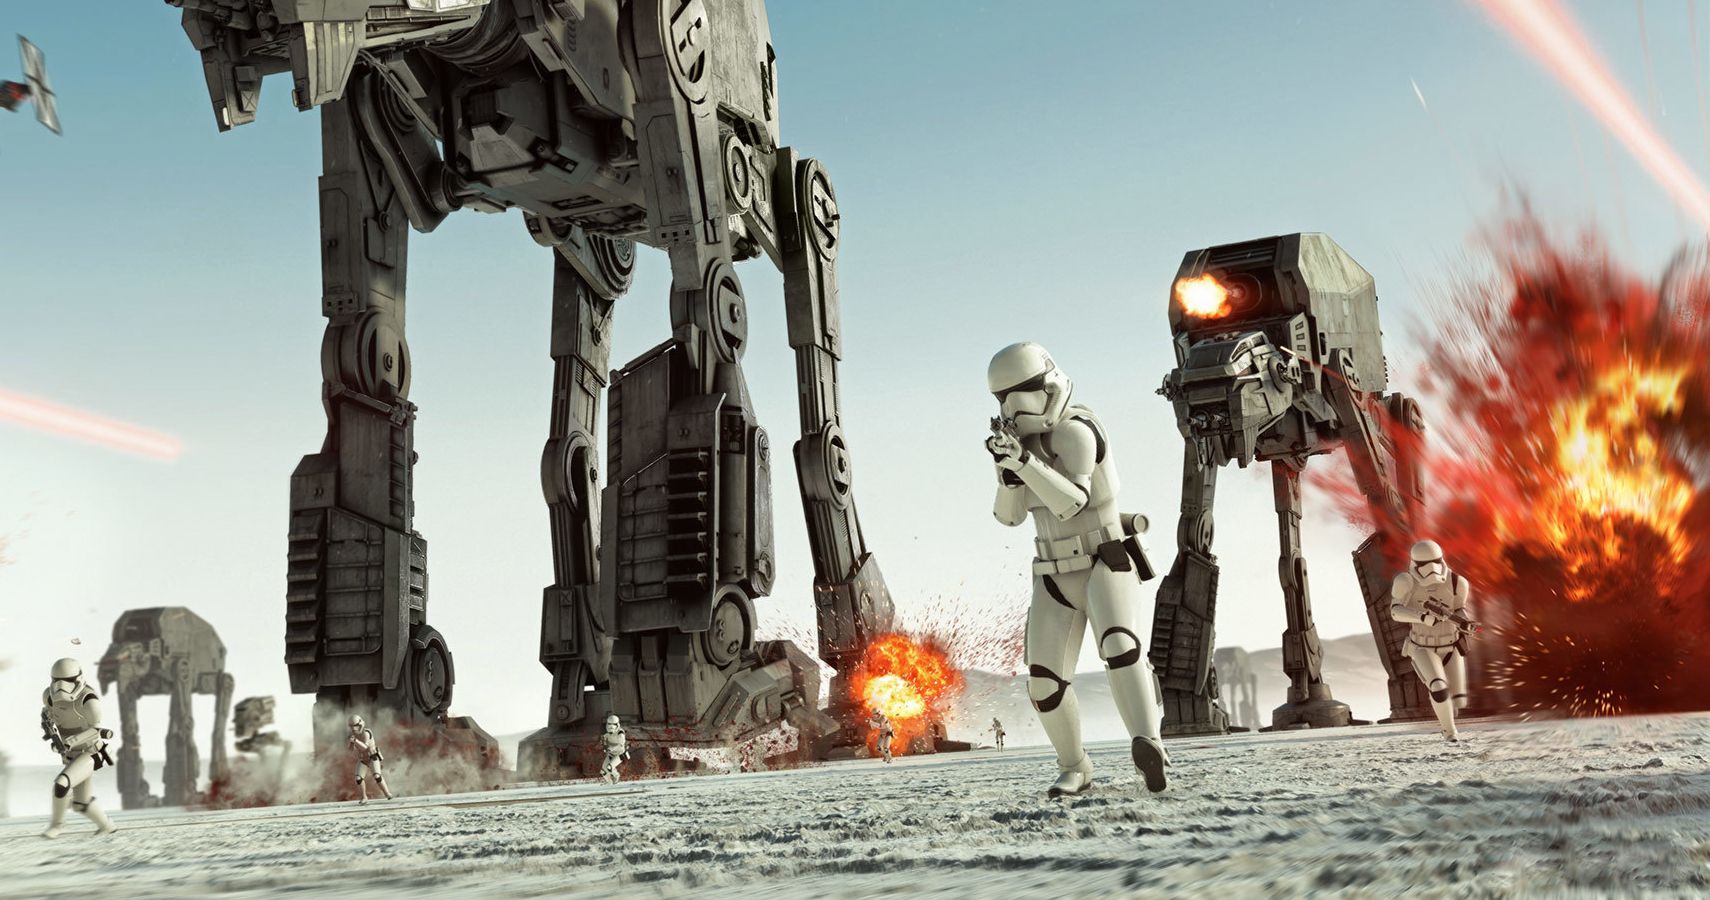 Stormtroopers running into battle